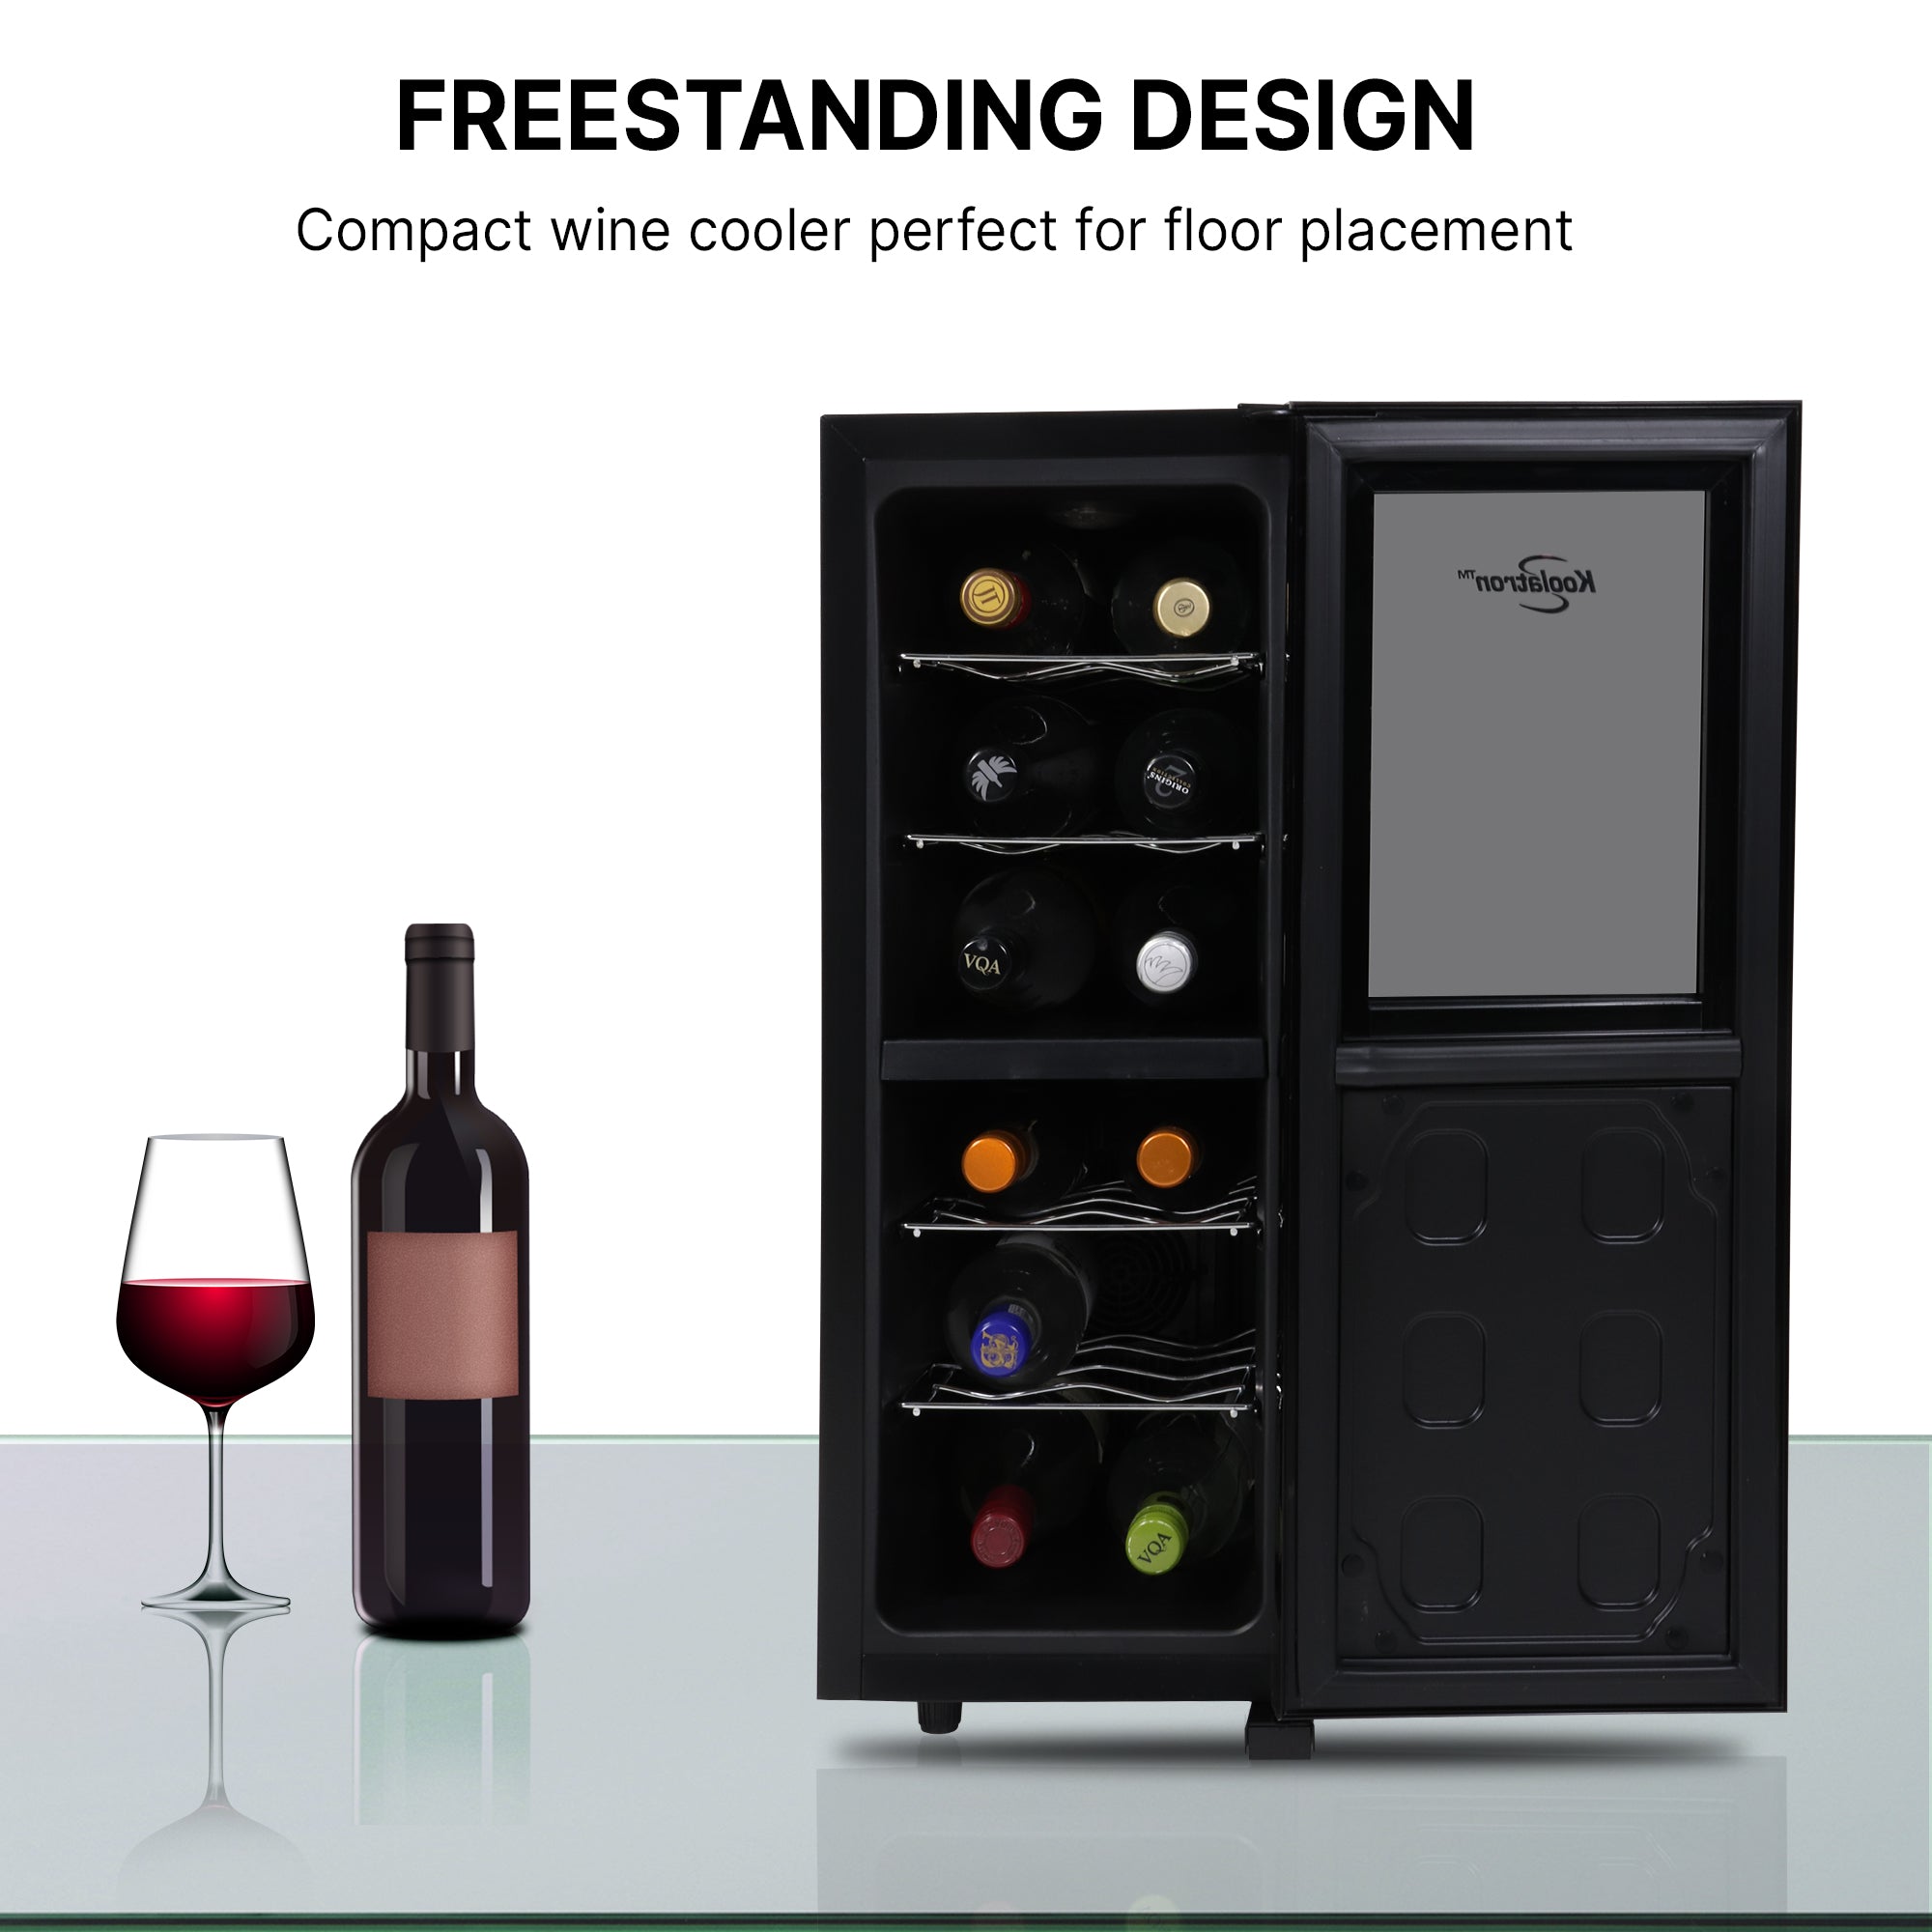 Koolatron 12 bottle wine cooler, open, with a bottle and glass of red wine to the left; Text above reads "Freestanding design: Compact wine cooler perfect for floor placement"